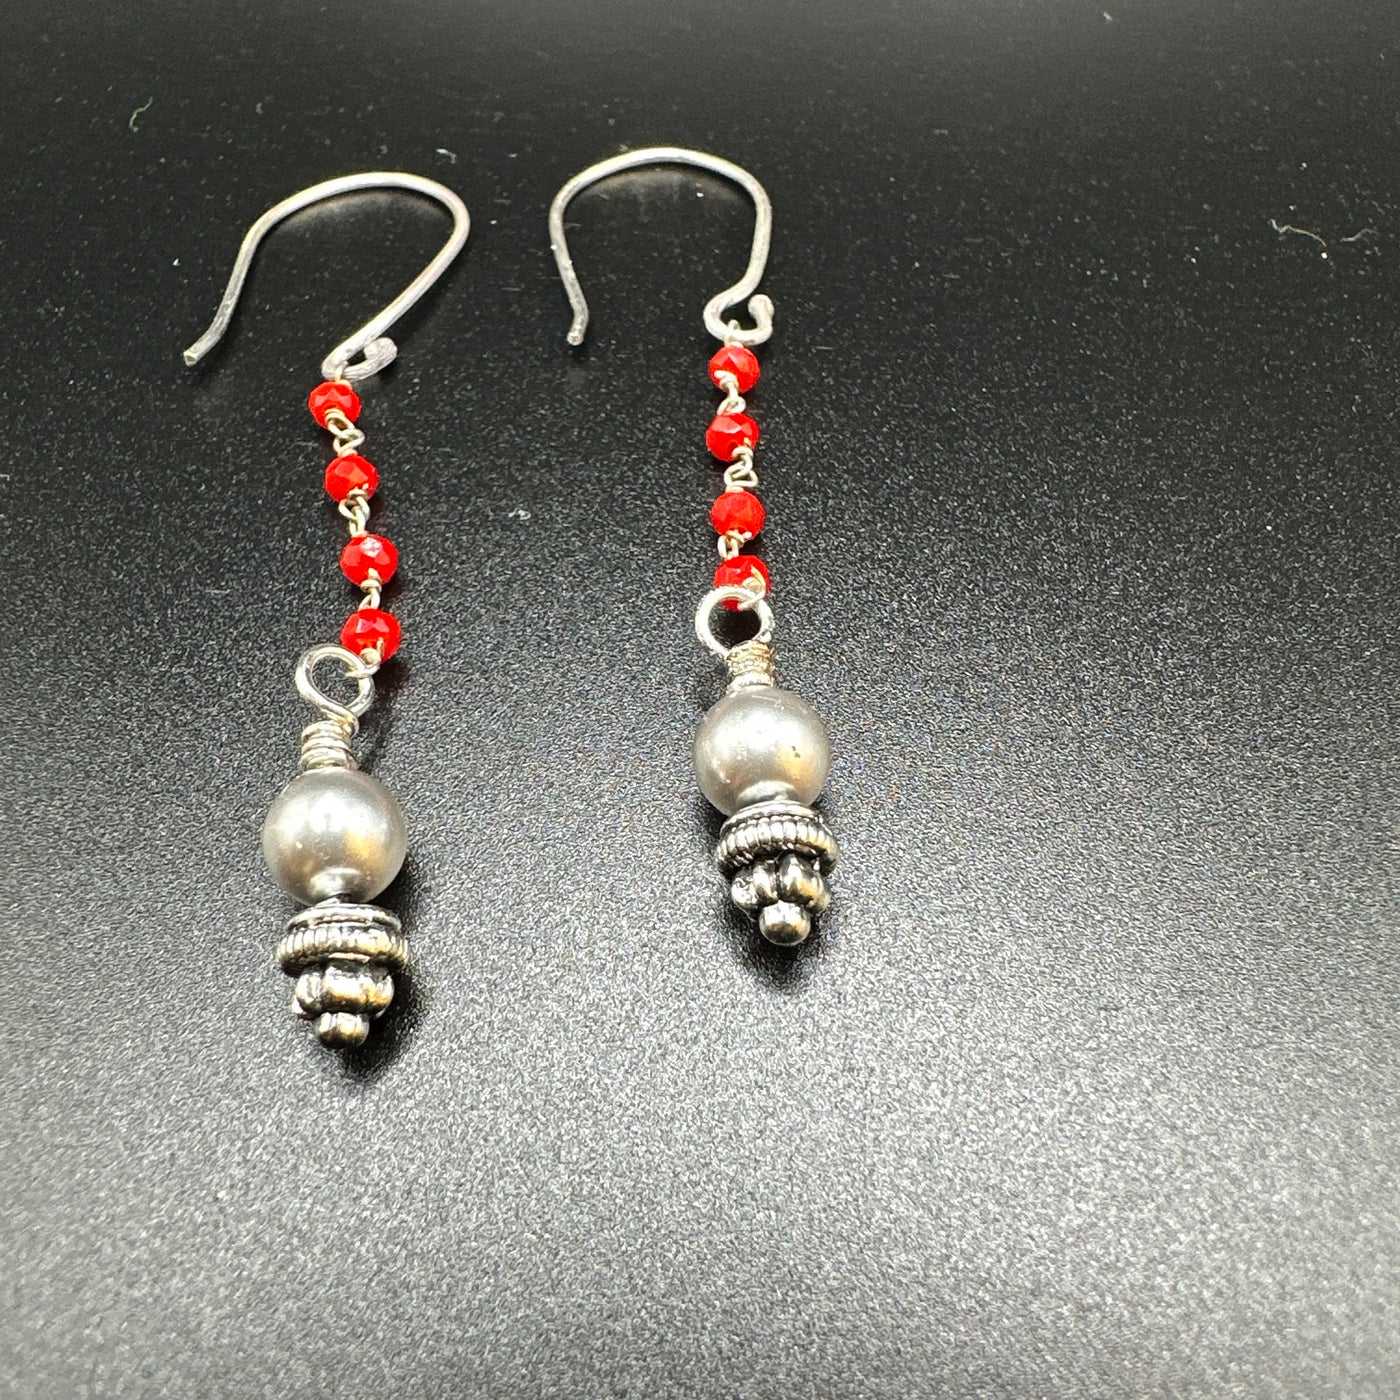 Earrings silver 925 with red beads and light grey pearls